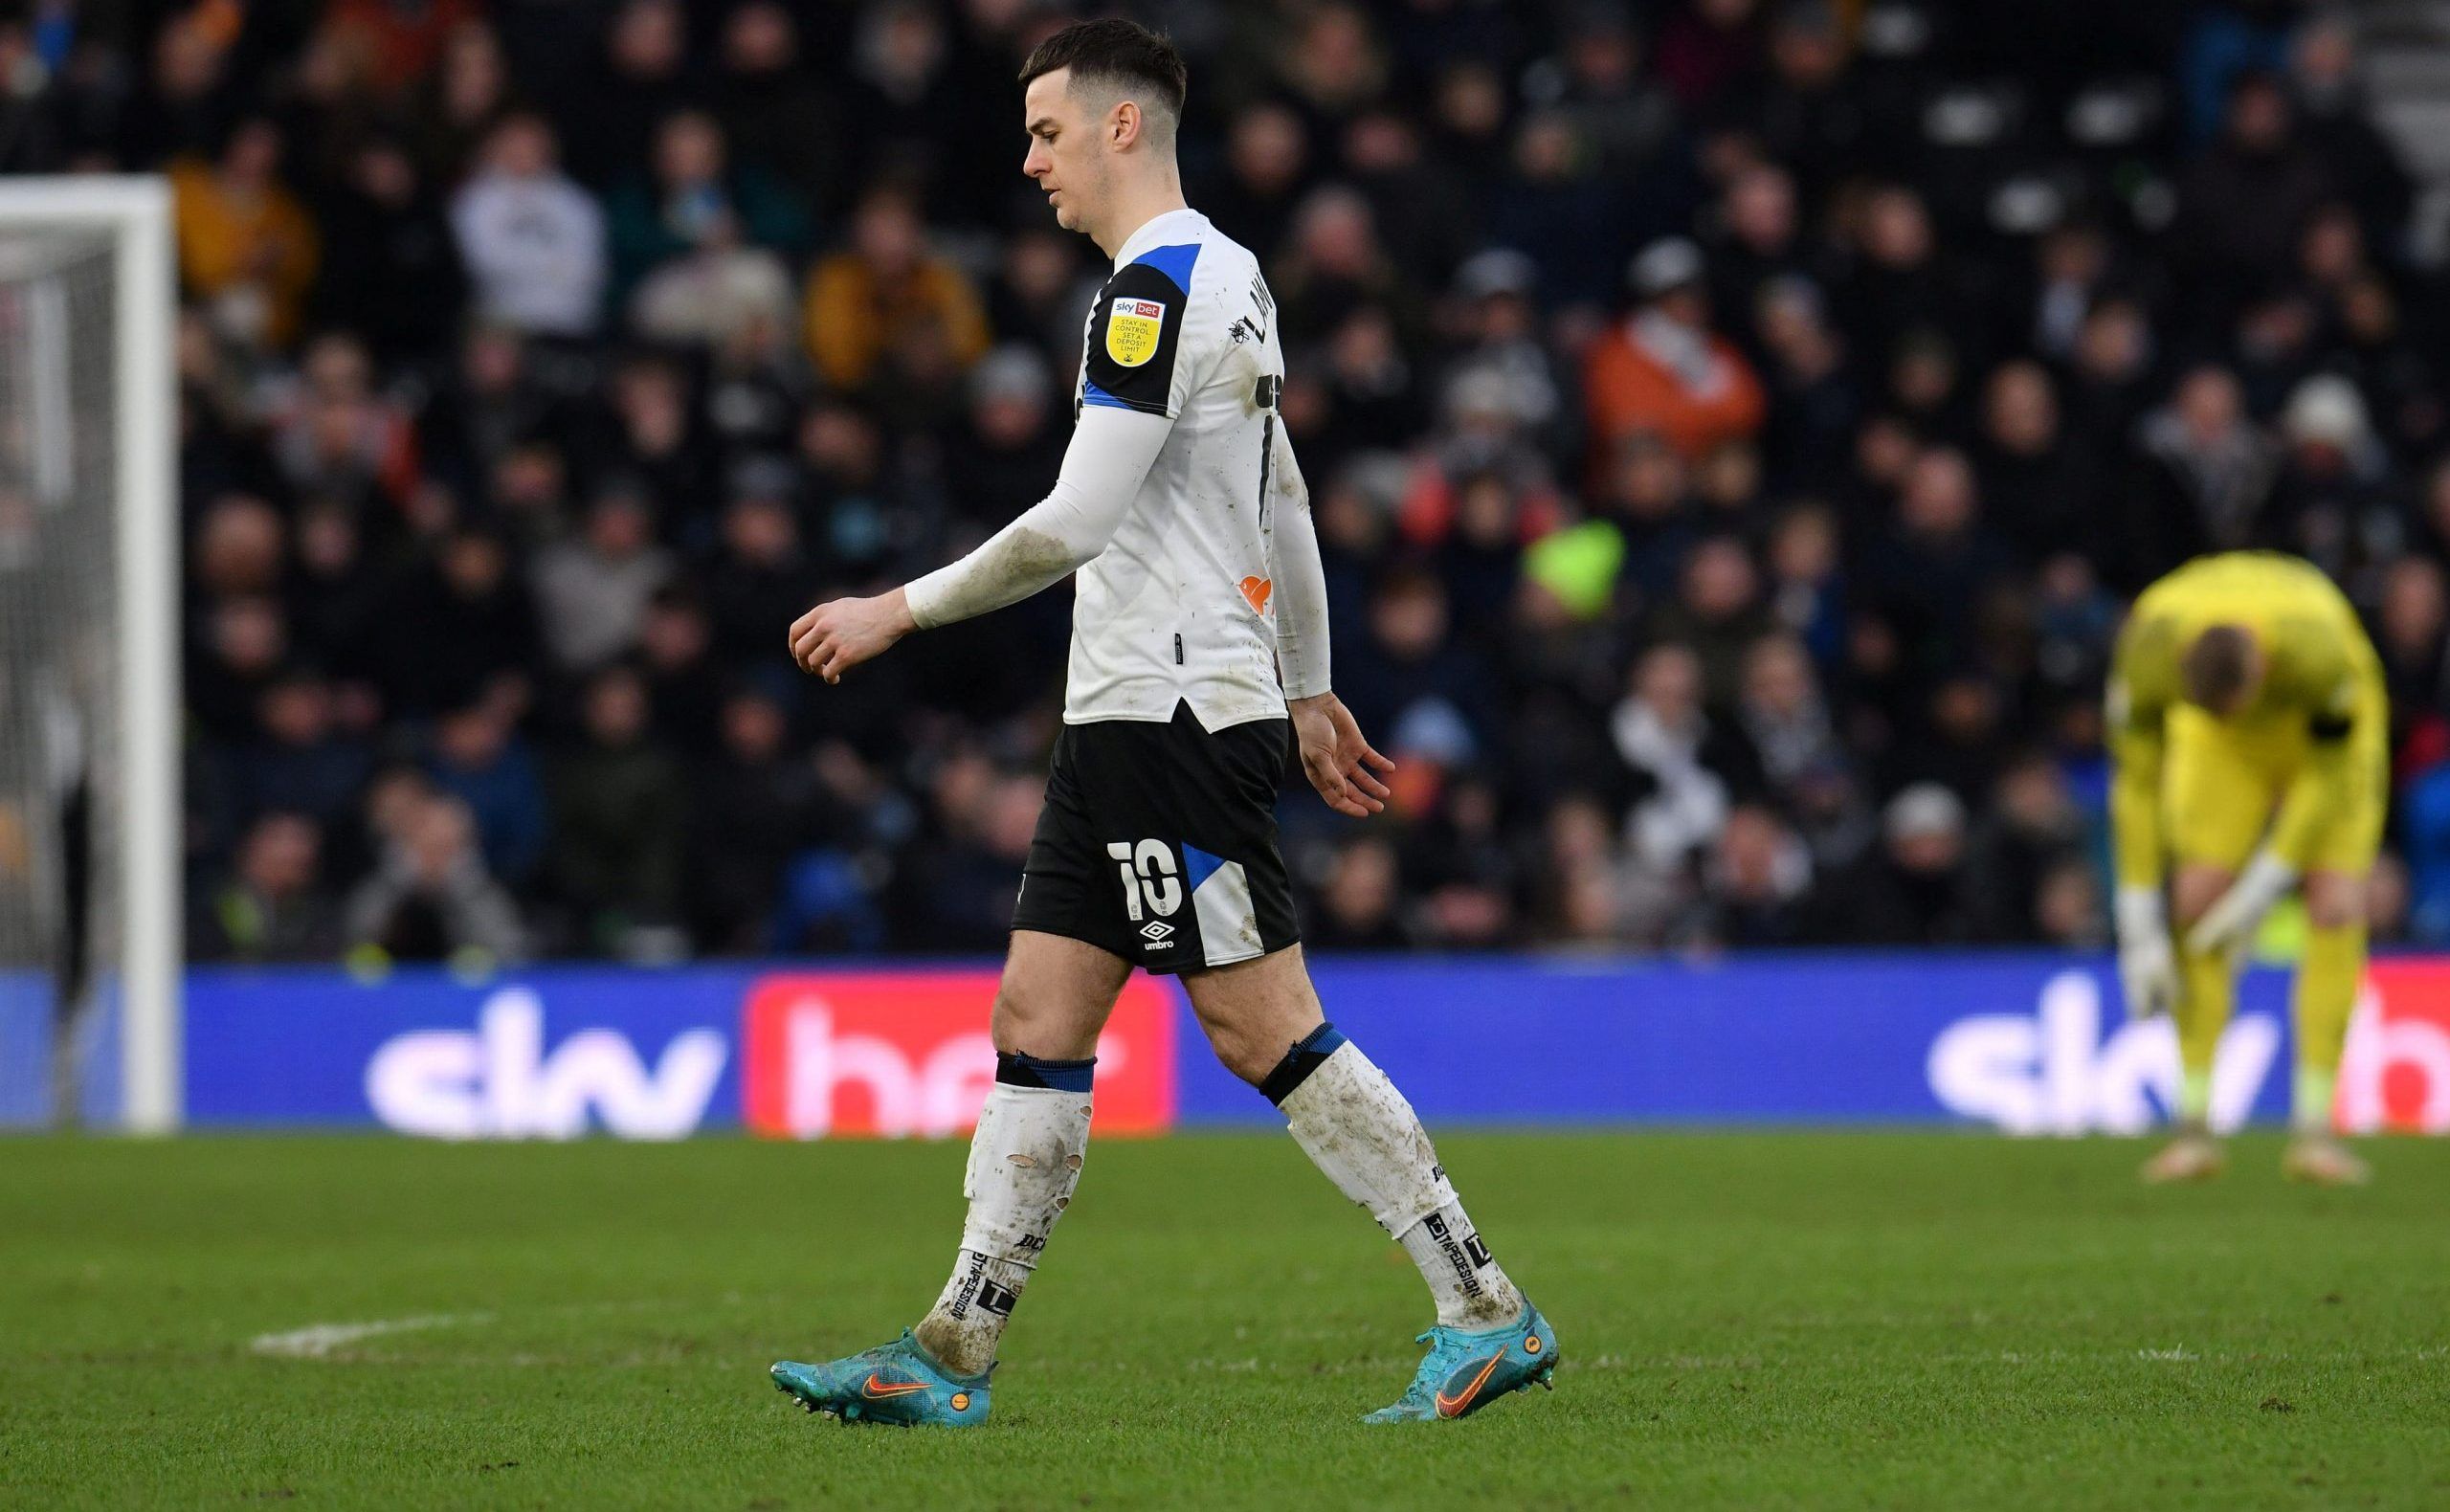 tom-lawrence-west-brom-transfer-news-steve-bruce-the-baggies-championship